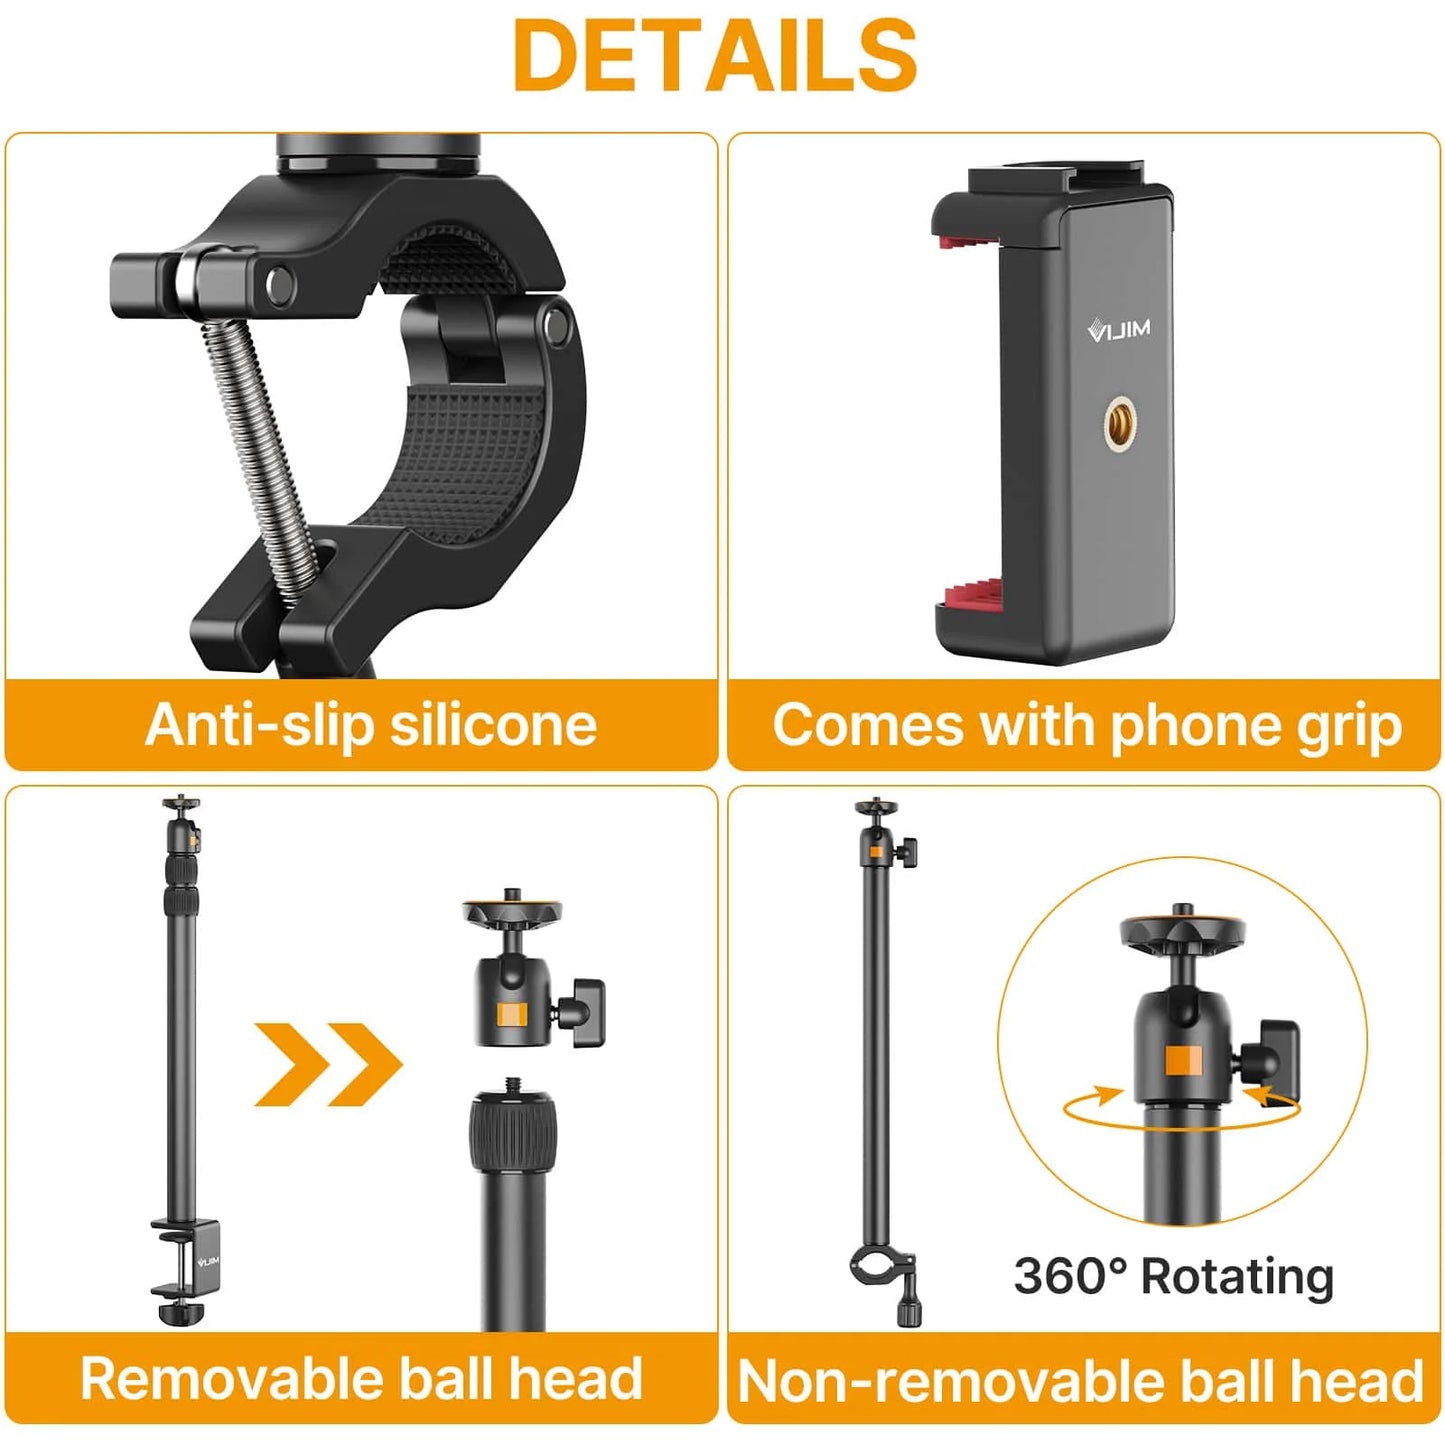 VIJIM LS02 Adjustable Table Stand with Extension Arm - For Smartphone, Camera and Lamp